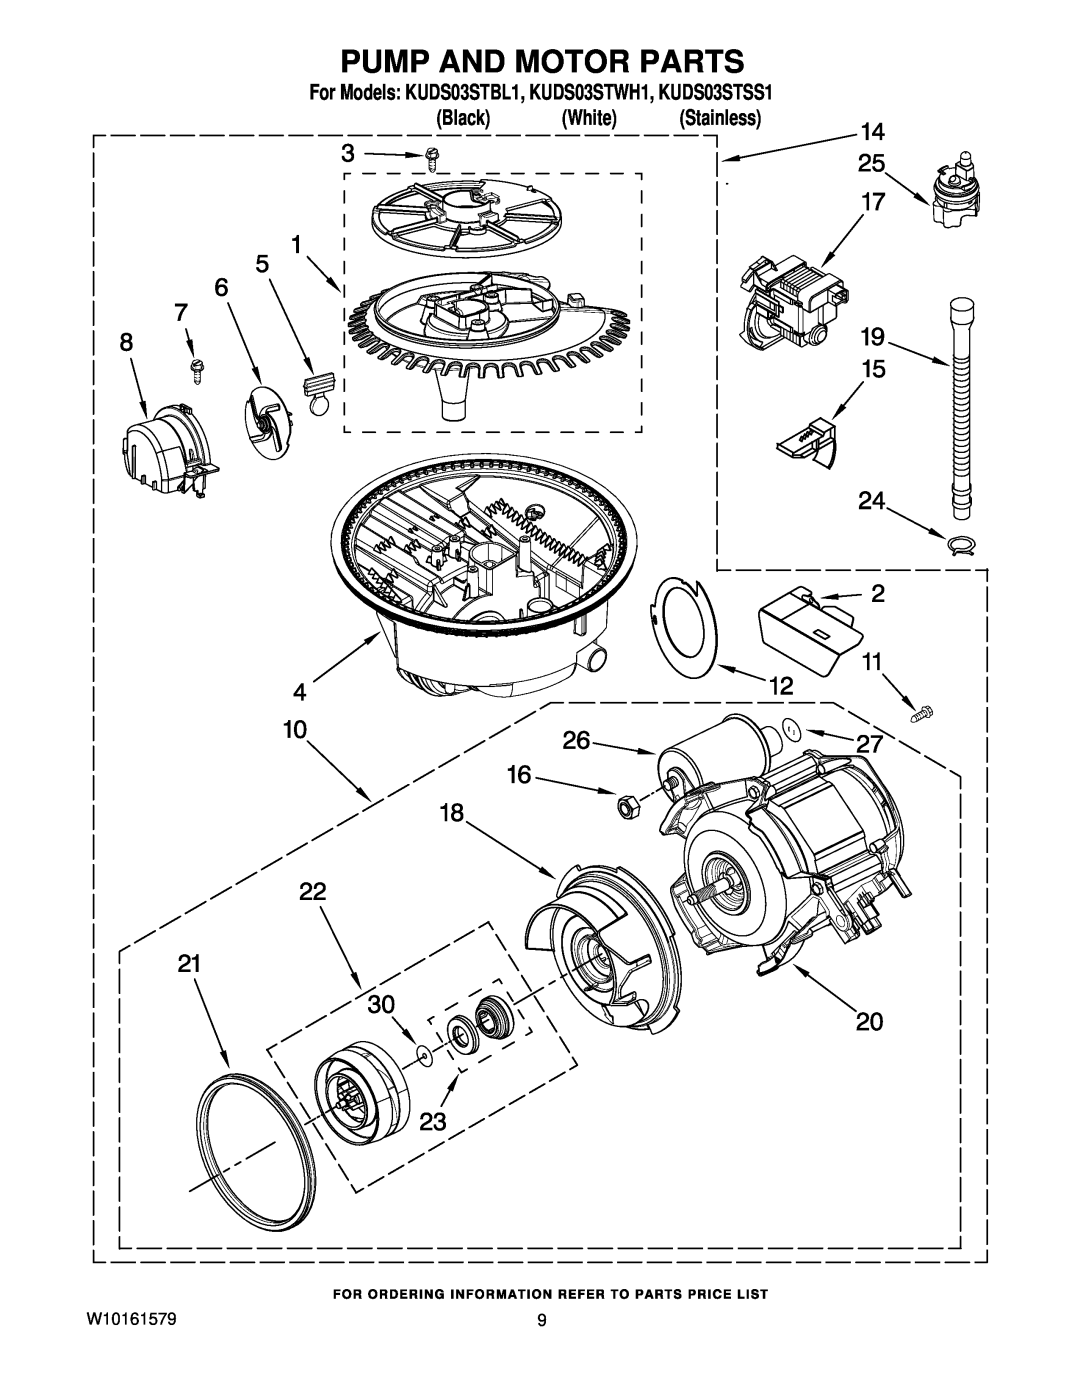 KitchenAid manual Pump And Motor Parts, For Models KUDS03STBL1, KUDS03STWH1, KUDS03STSS1, Black White Stainless 